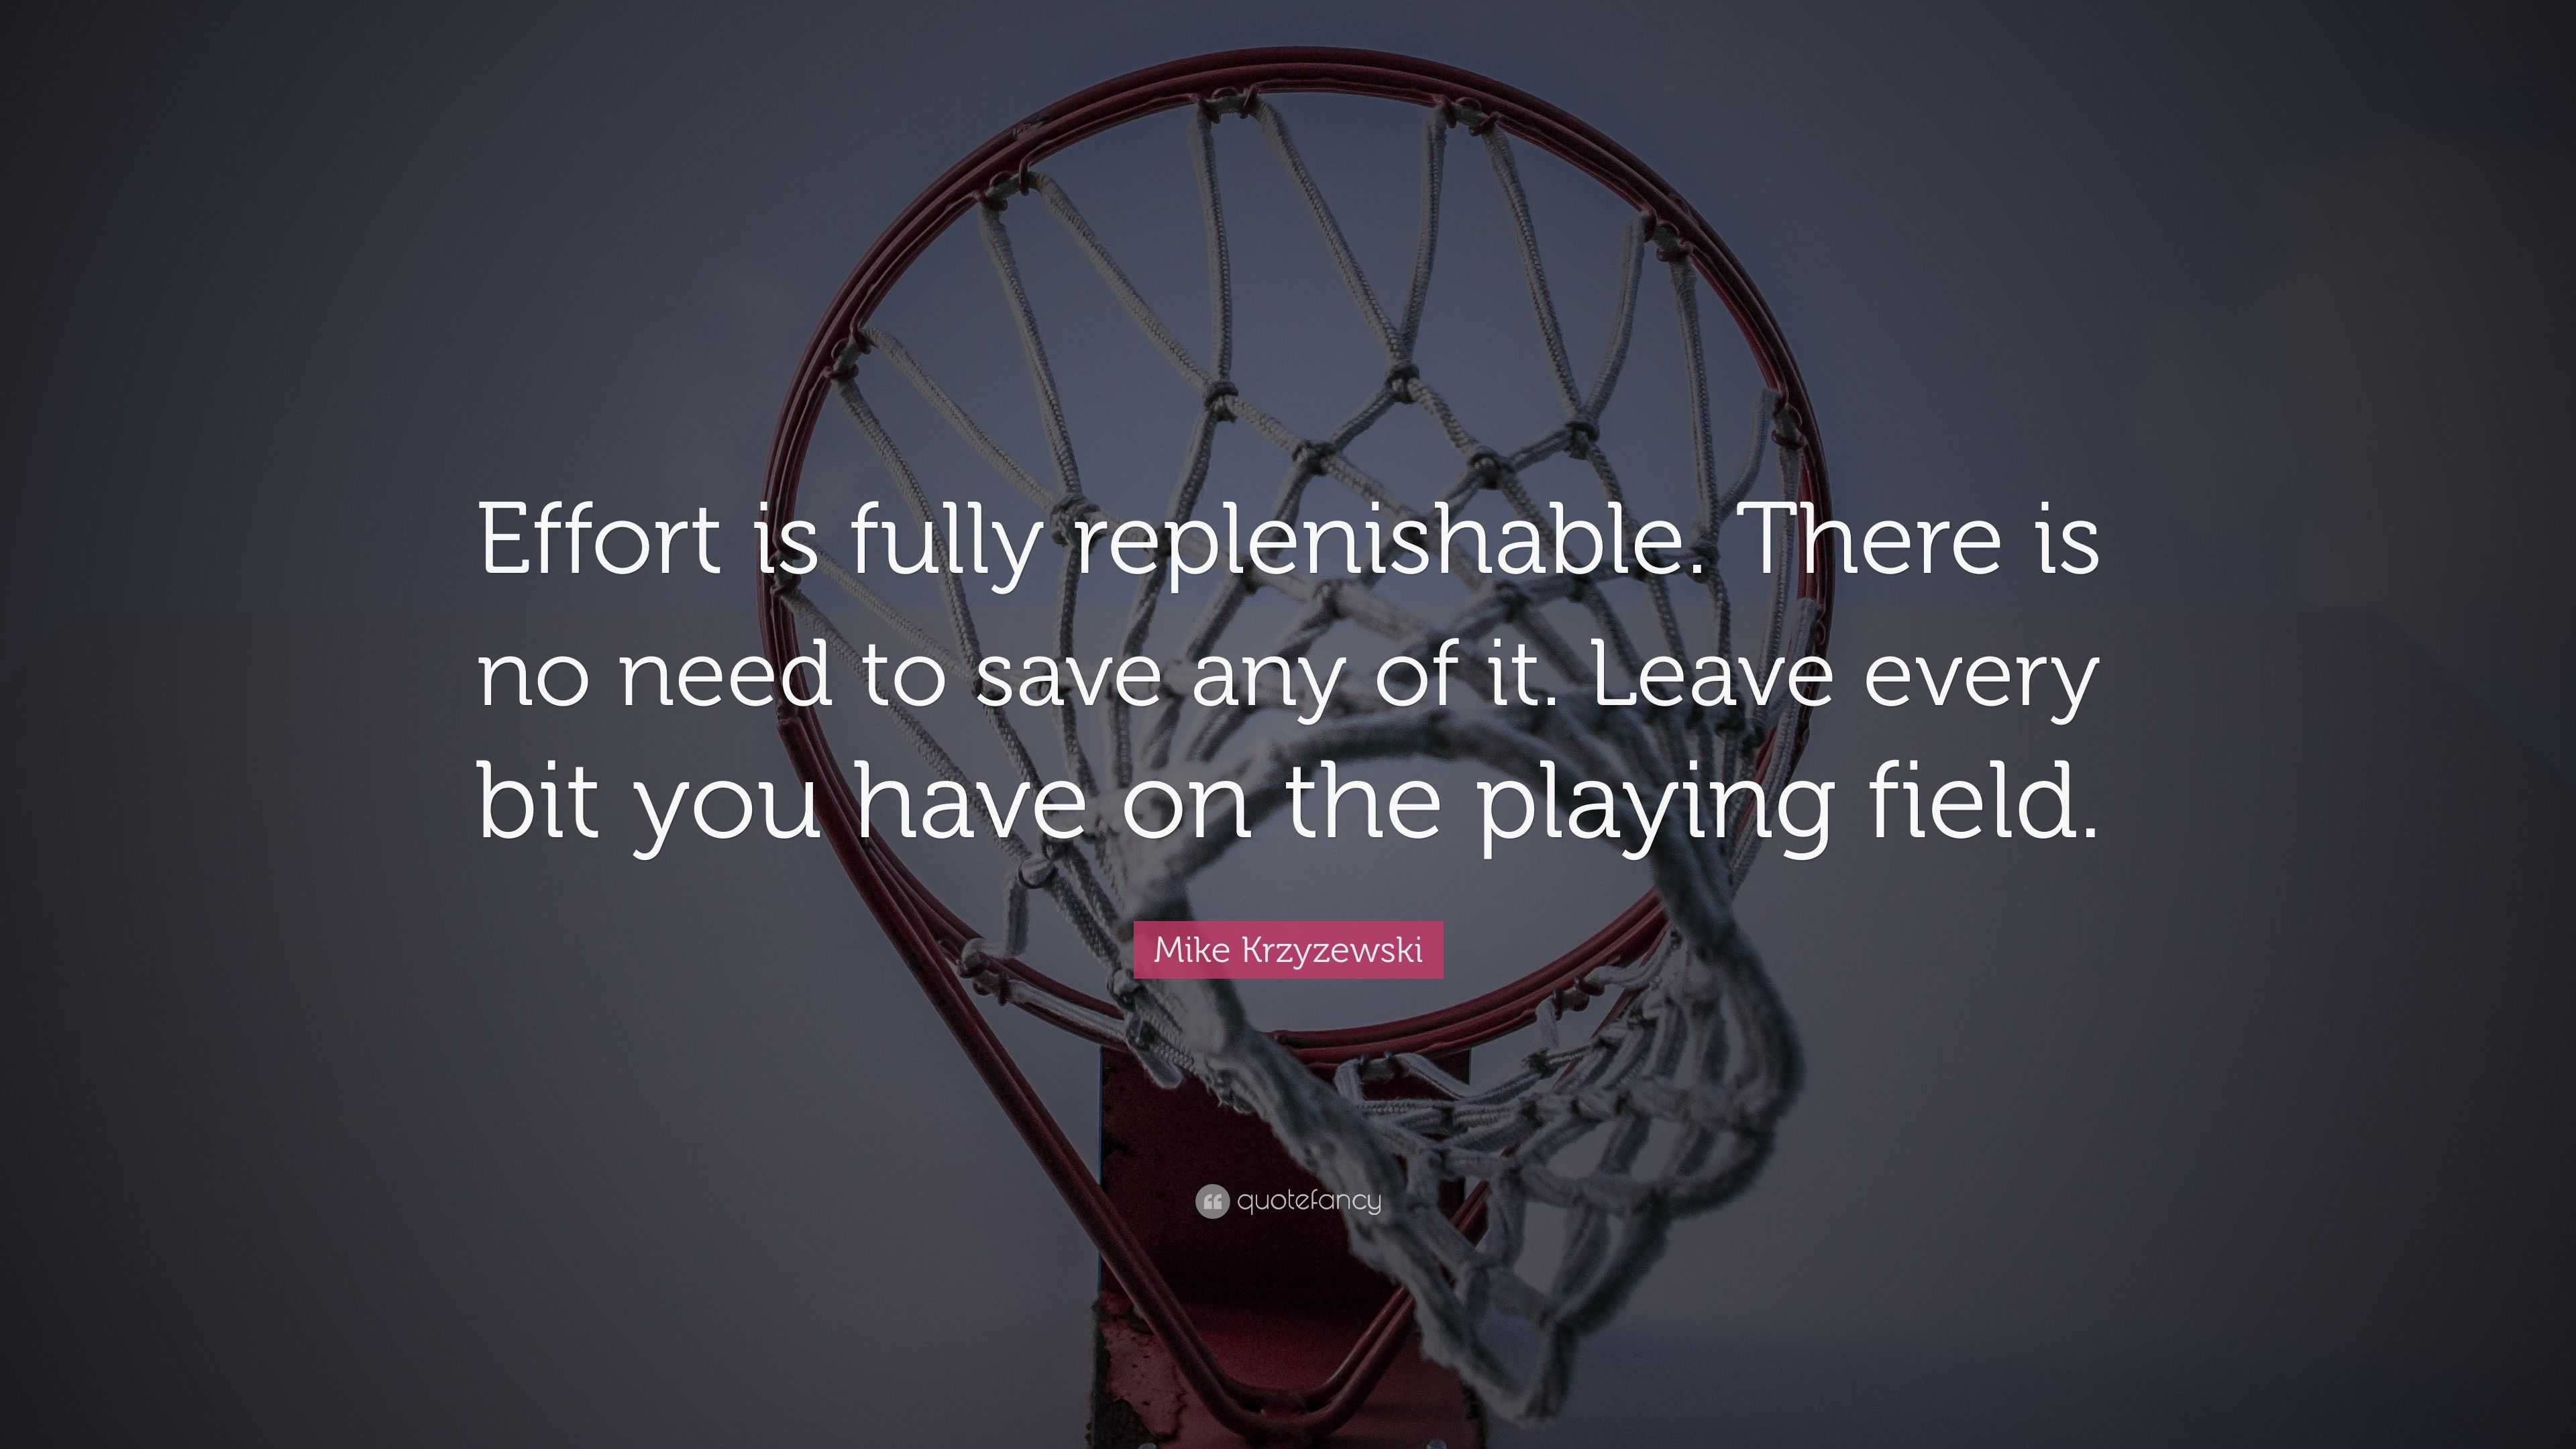 Mike Krzyzewski Quote: “Effort is fully replenishable. There is no need ...